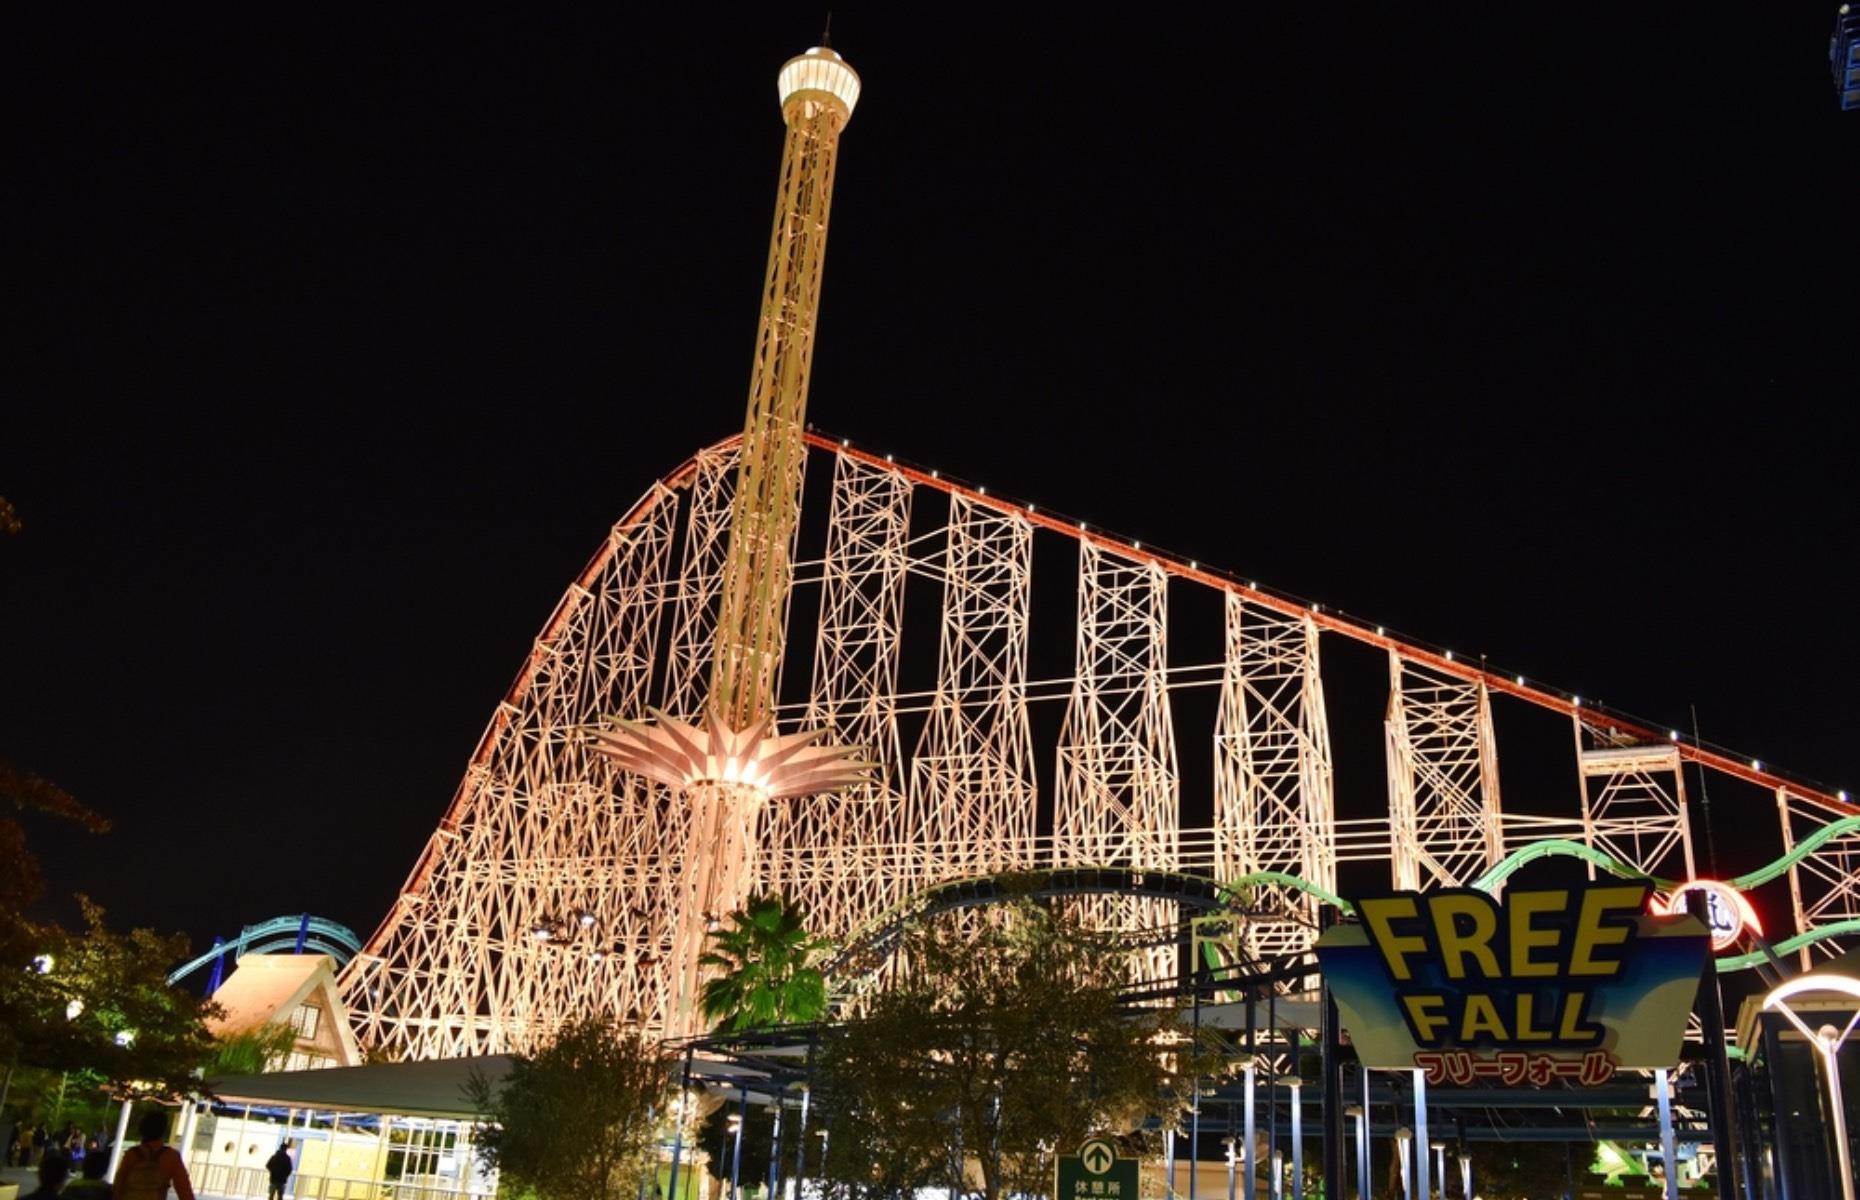 <p>Even the name, Steel Dragon 2000, makes the spine tingle. This is officially the longest steel roller coaster in the world.</p>  <p>Opened in 2000, it takes daring riders along a 8,133-foot track and sends them plummeting 307 feet at speeds of up to 95 miles per hour. The ride also has the most steel ever used on a roller coaster to protect it from earthquakes.</p>